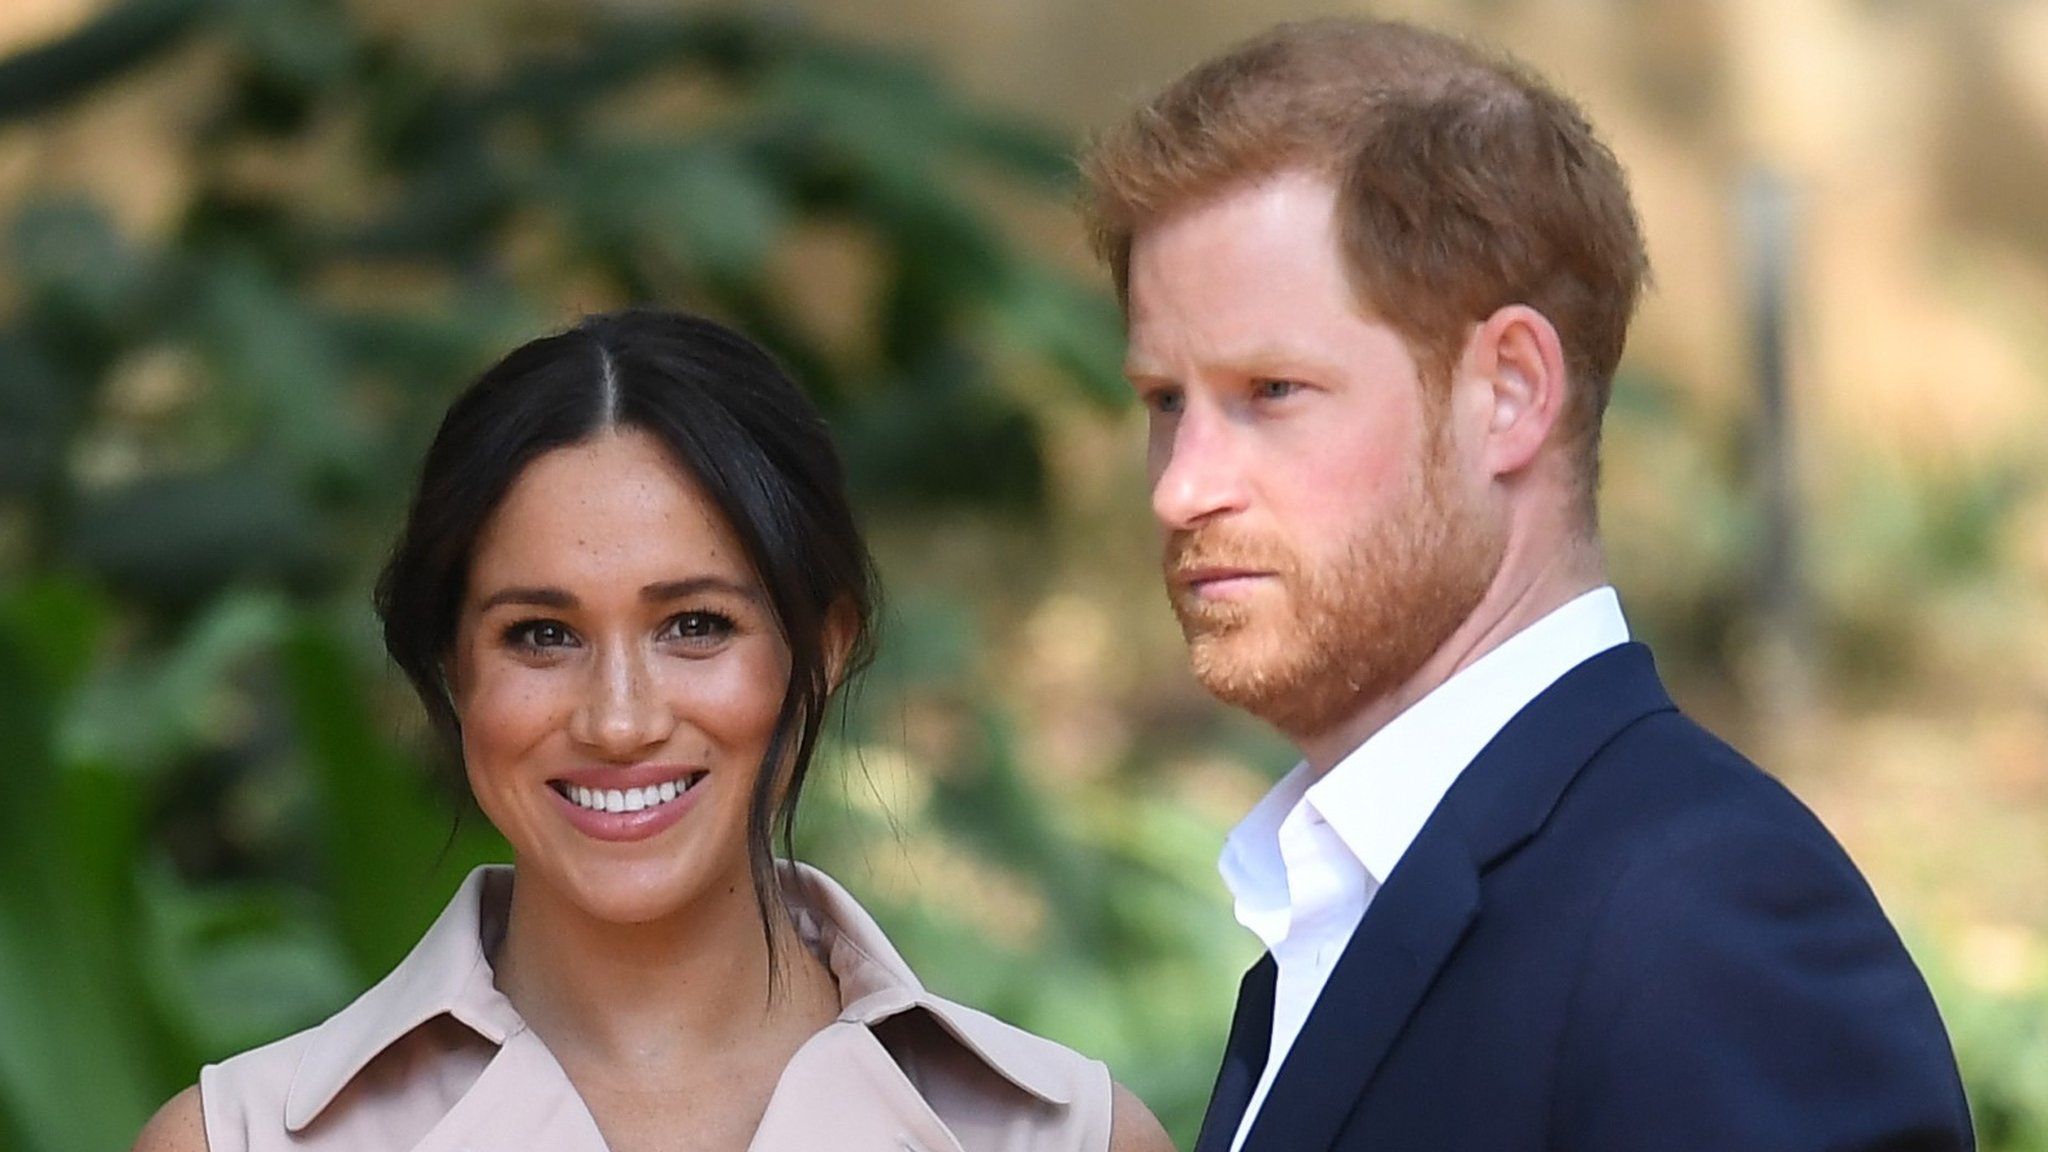 The duke and duchess of Sussex